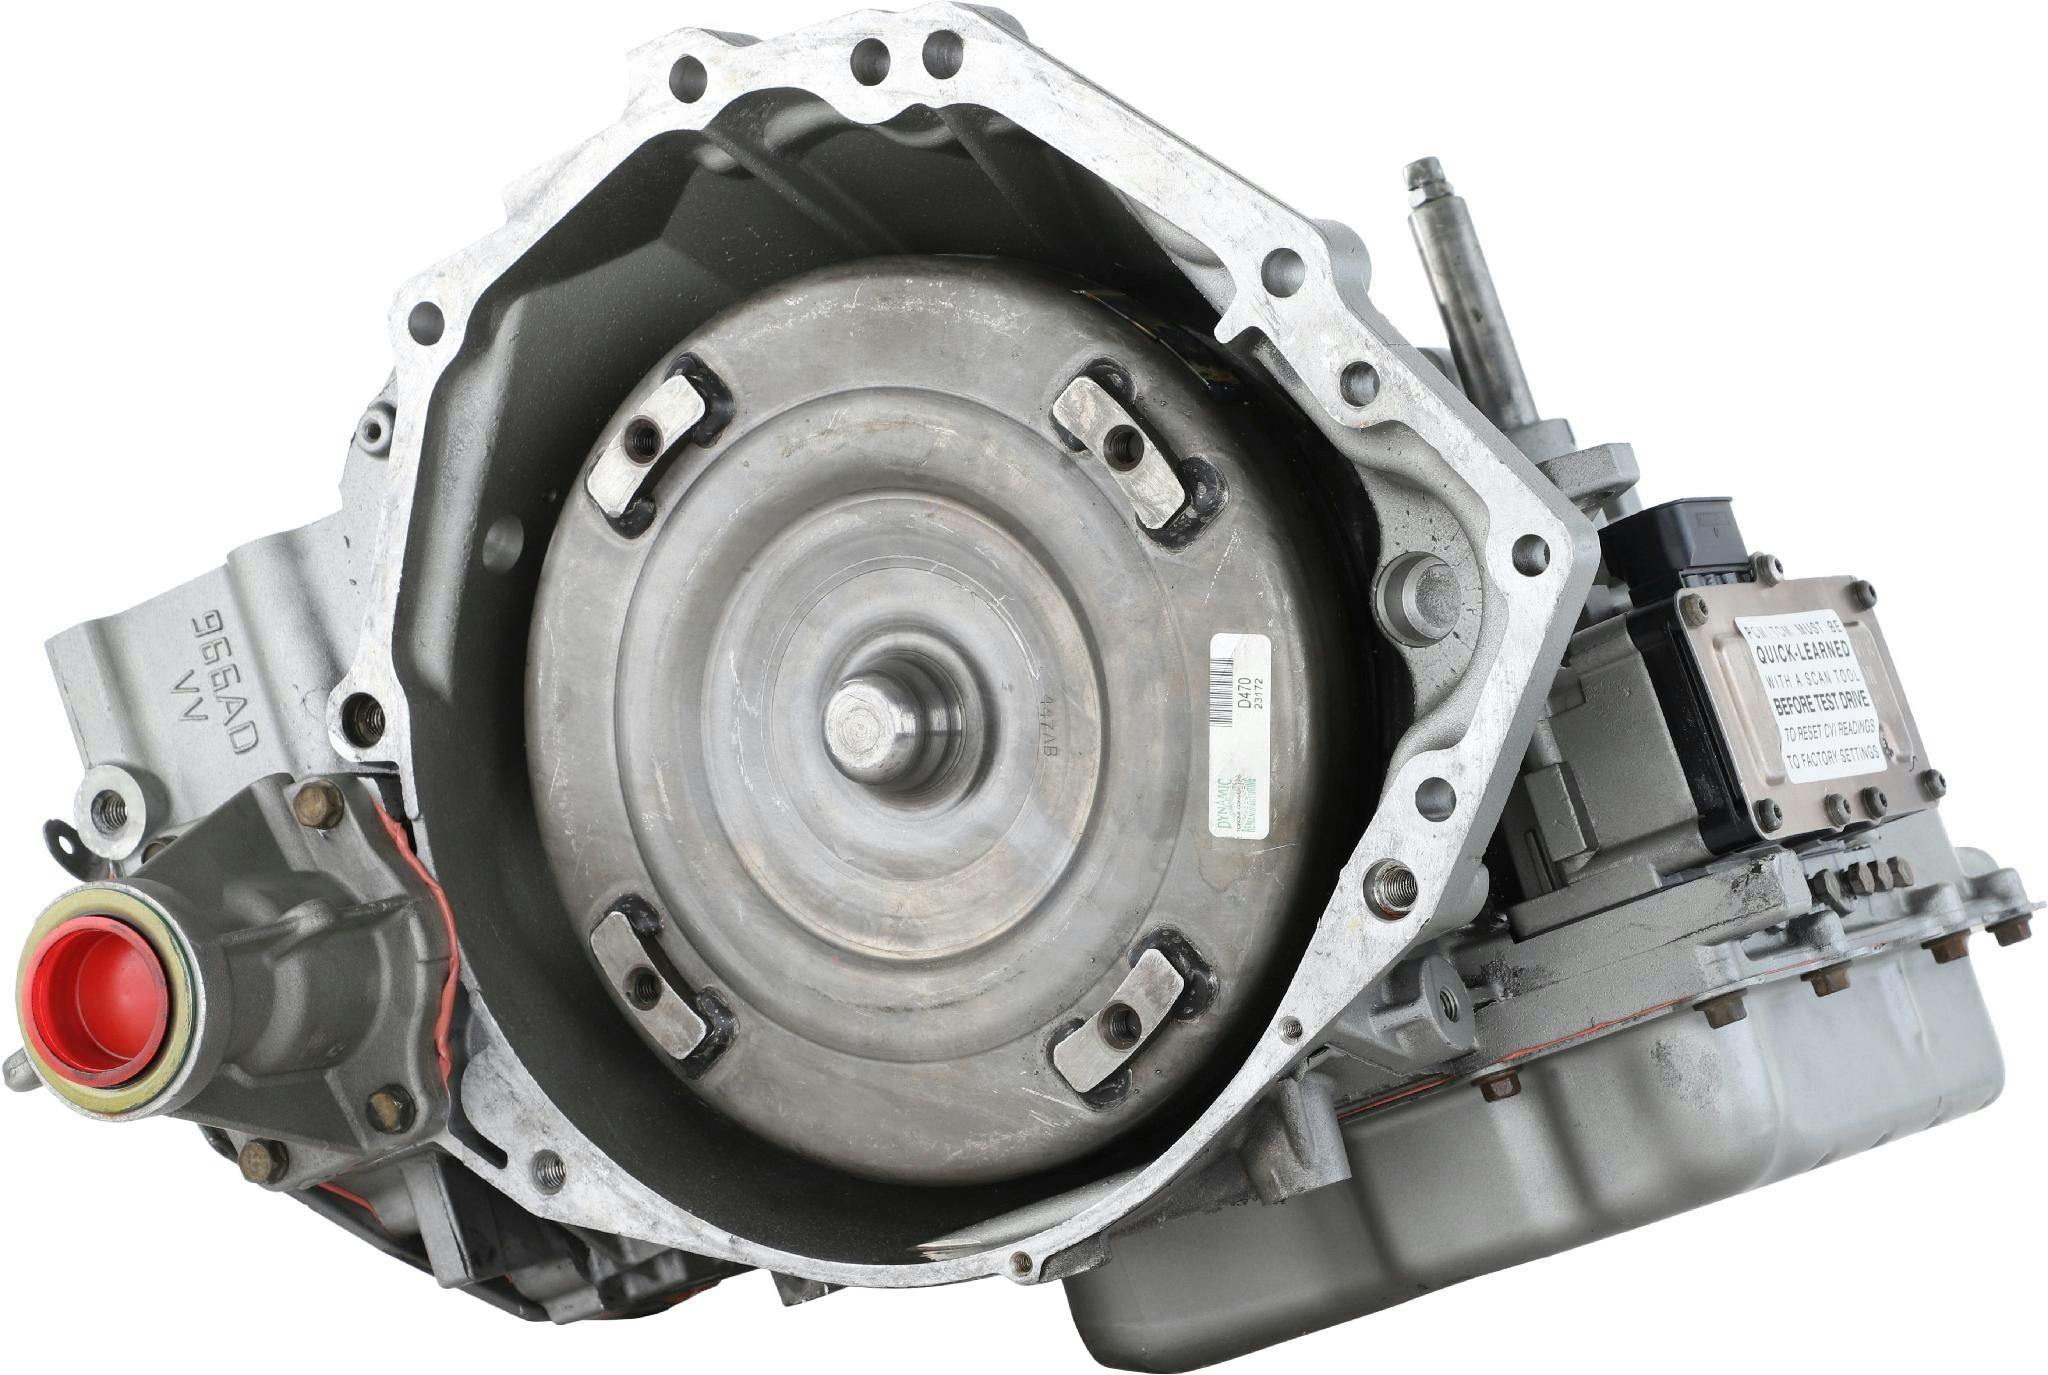 Automatic Transmission for 2007 Chrysler Town & Country and Dodge Caravan/Grand Caravan FWD with 3.3L V6 Engine